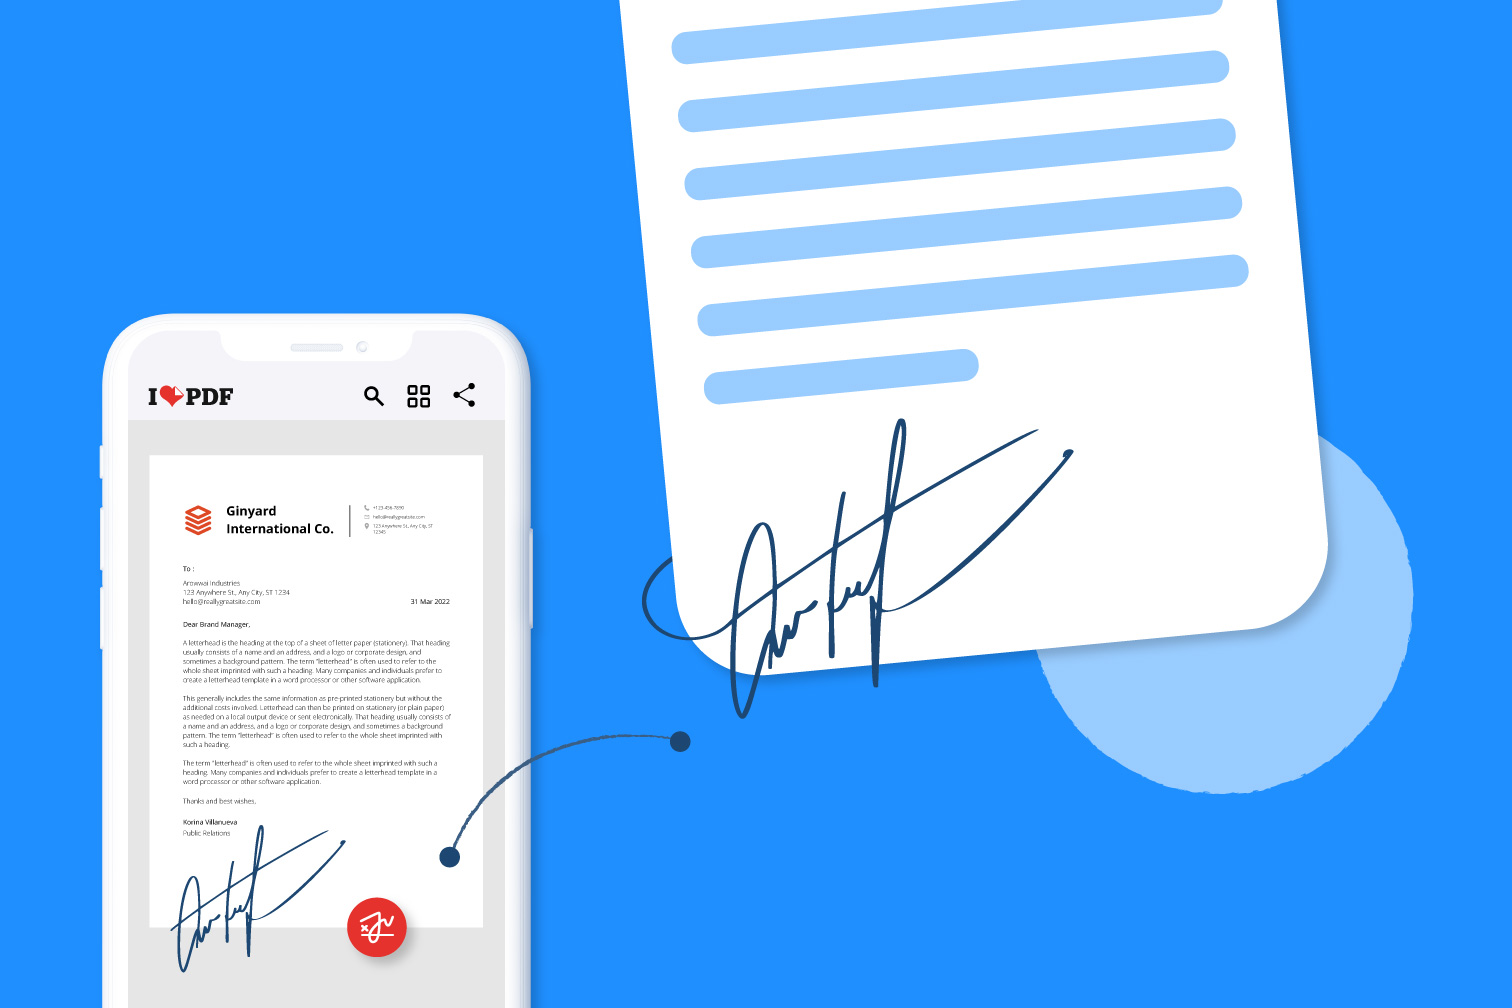 Handy Android App to Write on PDF File | CellularNews